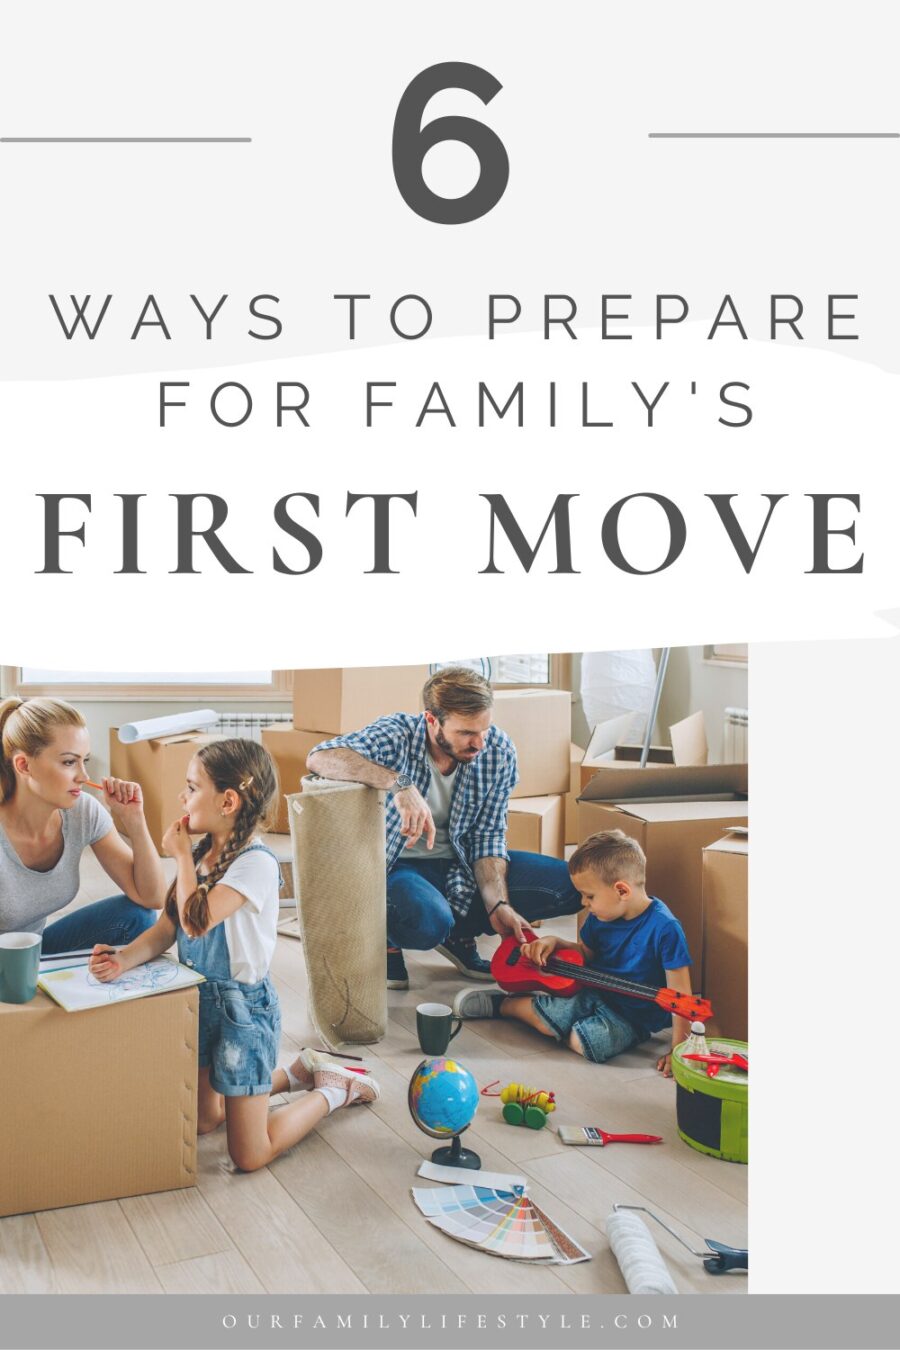 Organize, Plan, And Prepare Your Family’s First Move